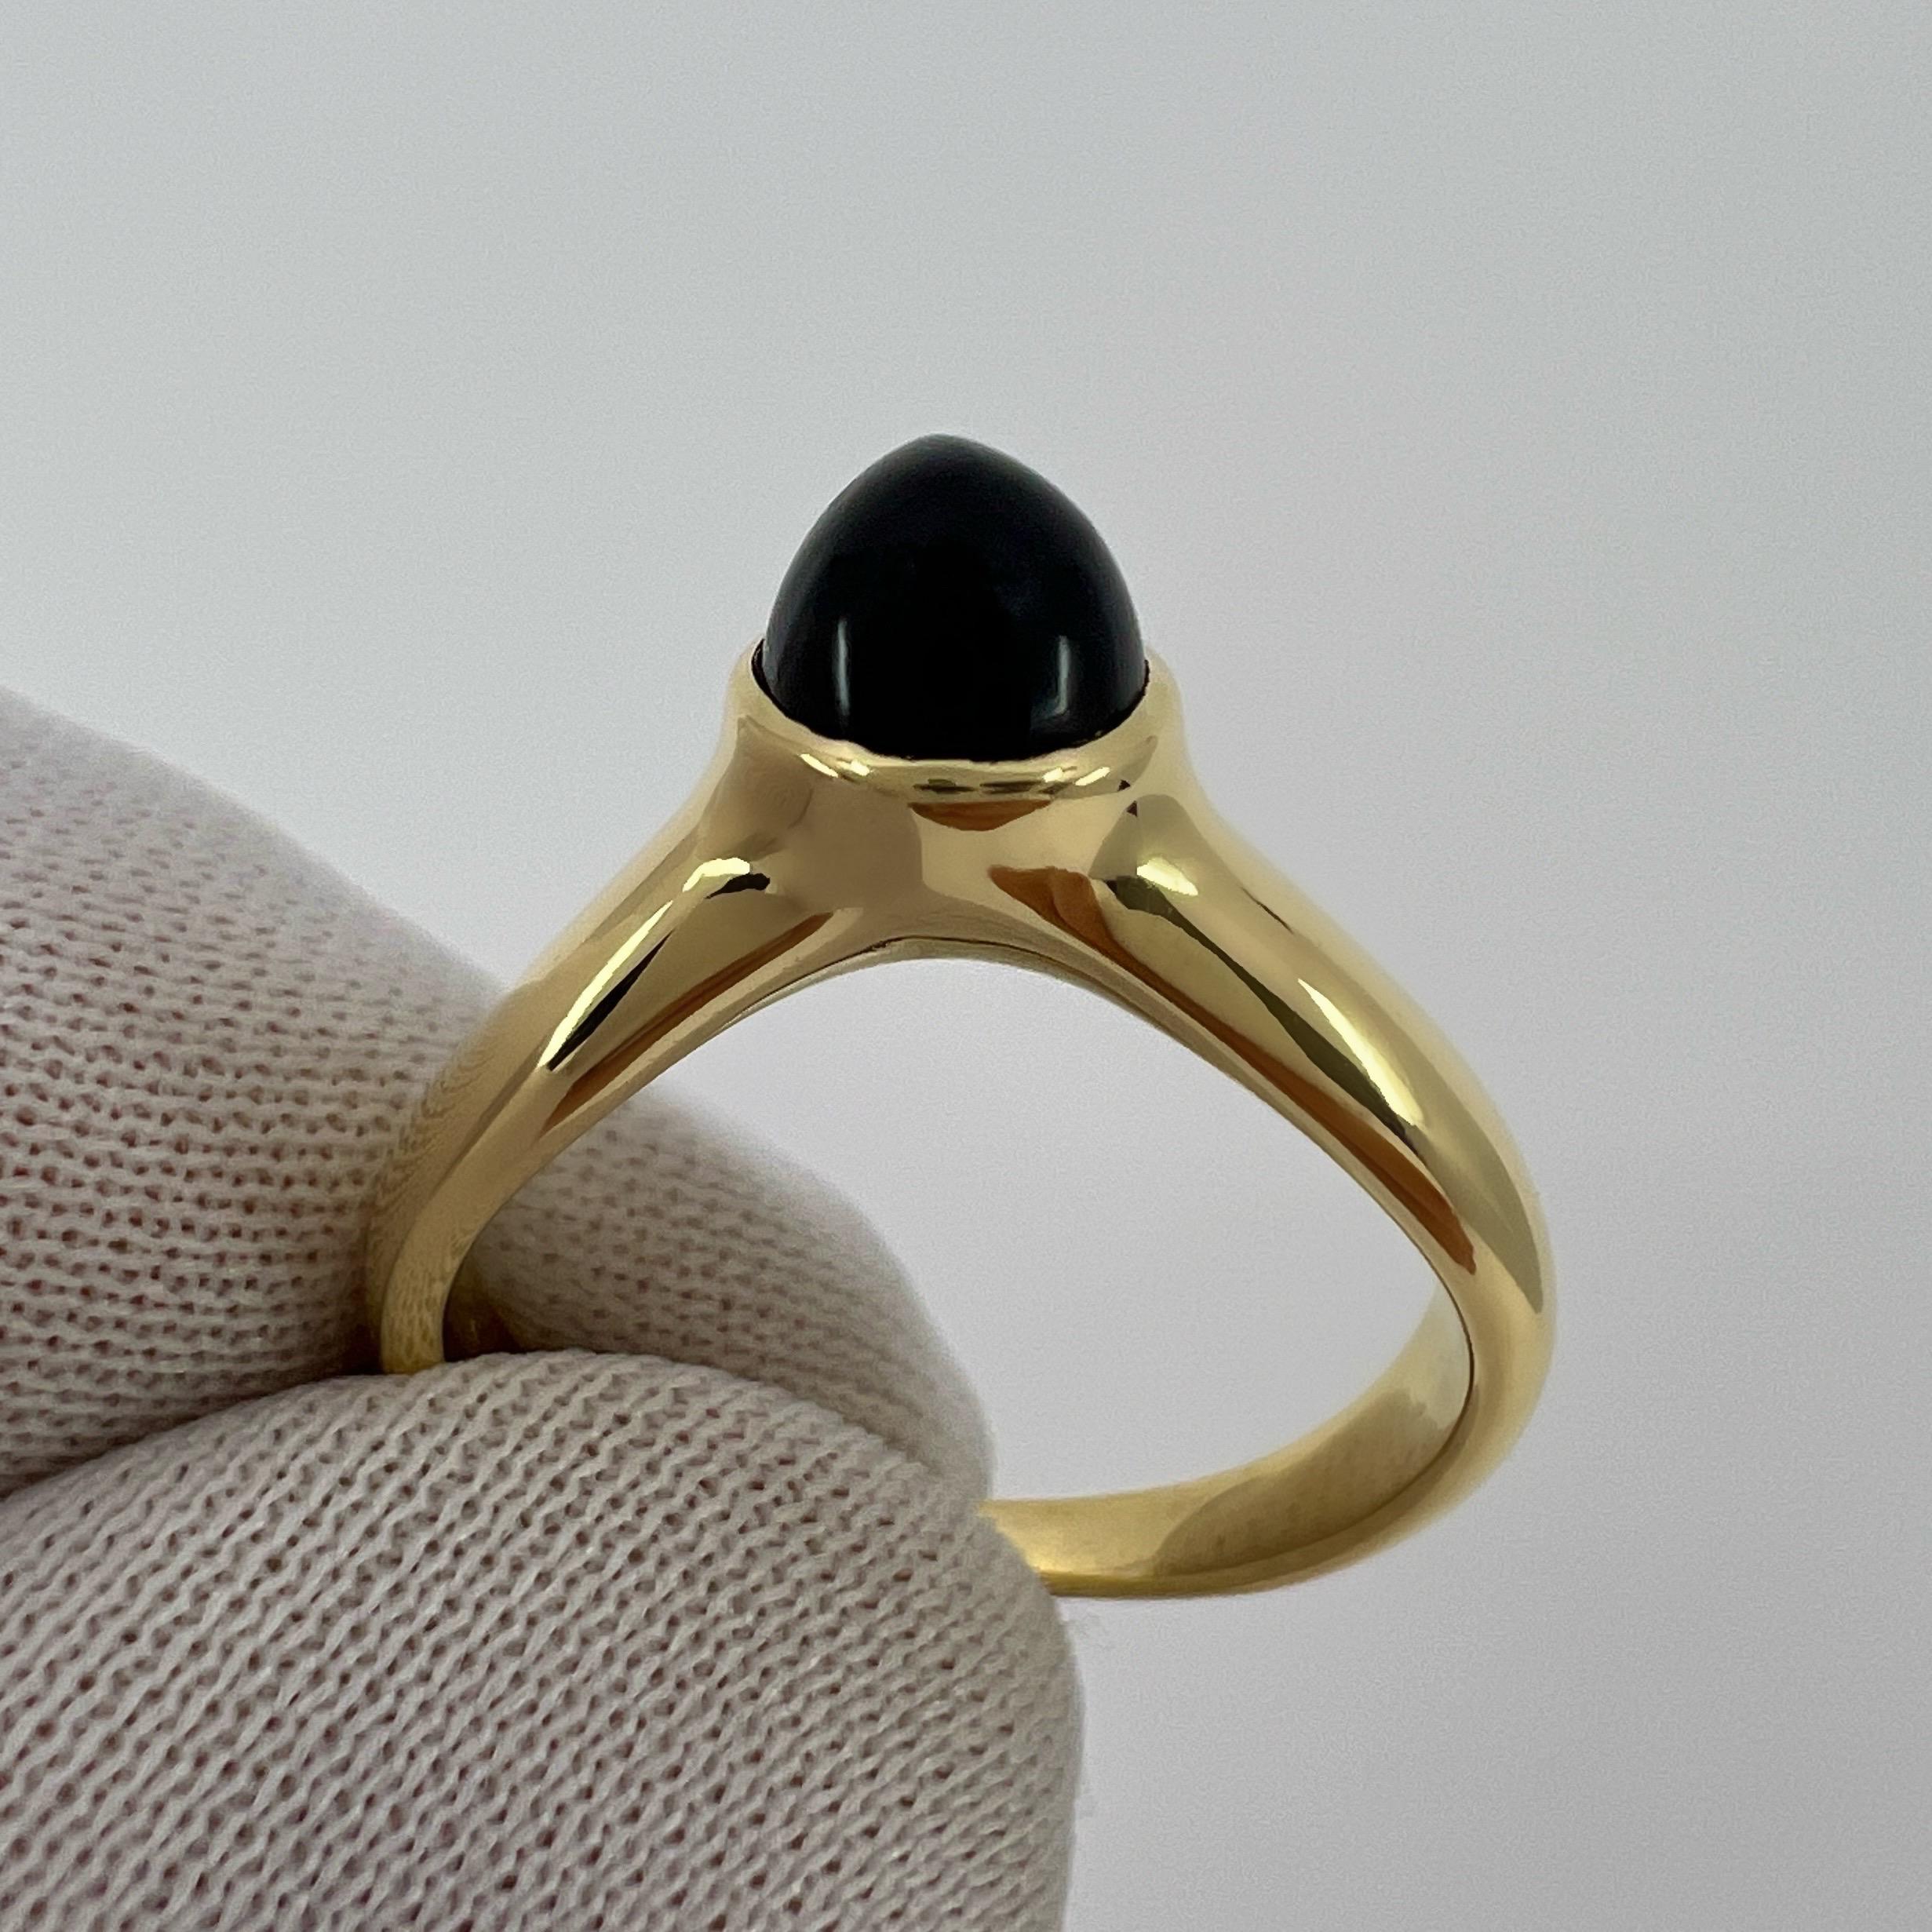 Rare Vintage Van Cleef & Arpels Black Onyx Pear Cabochon 18k Yellow Gold Ring For Sale 7